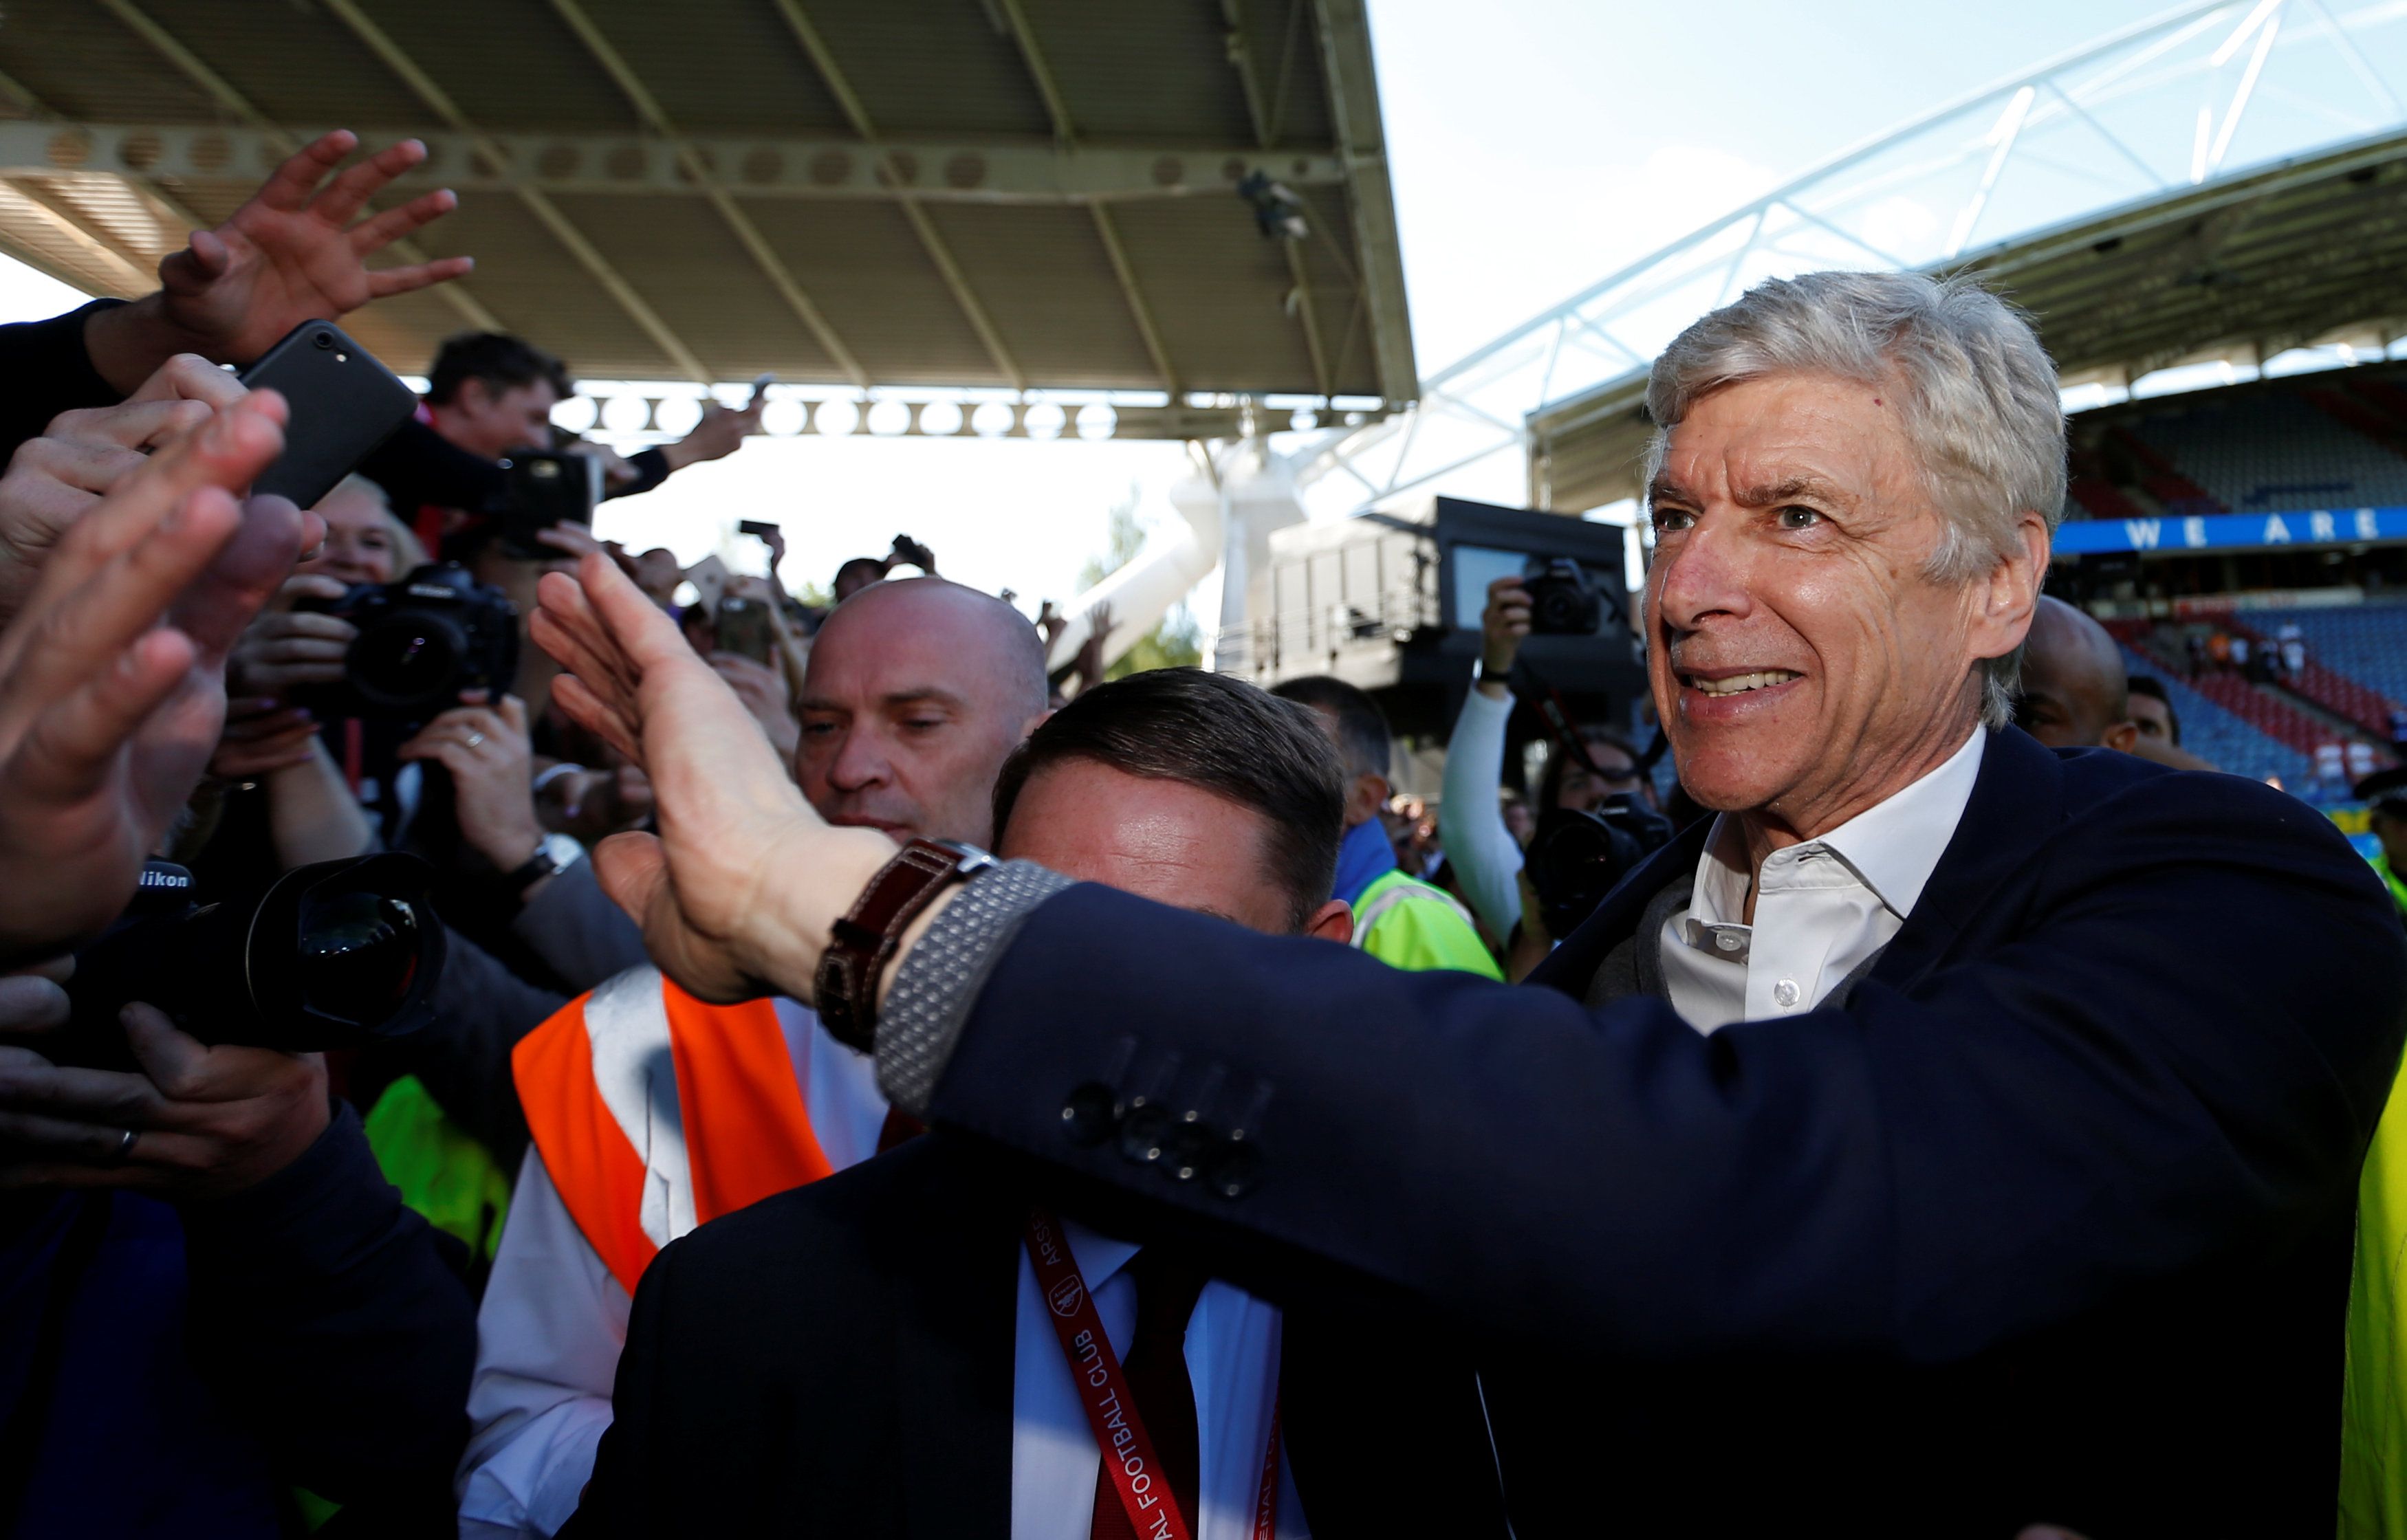 Arsene Wenger says goodbye to supporters in his final game as Arsenal manager